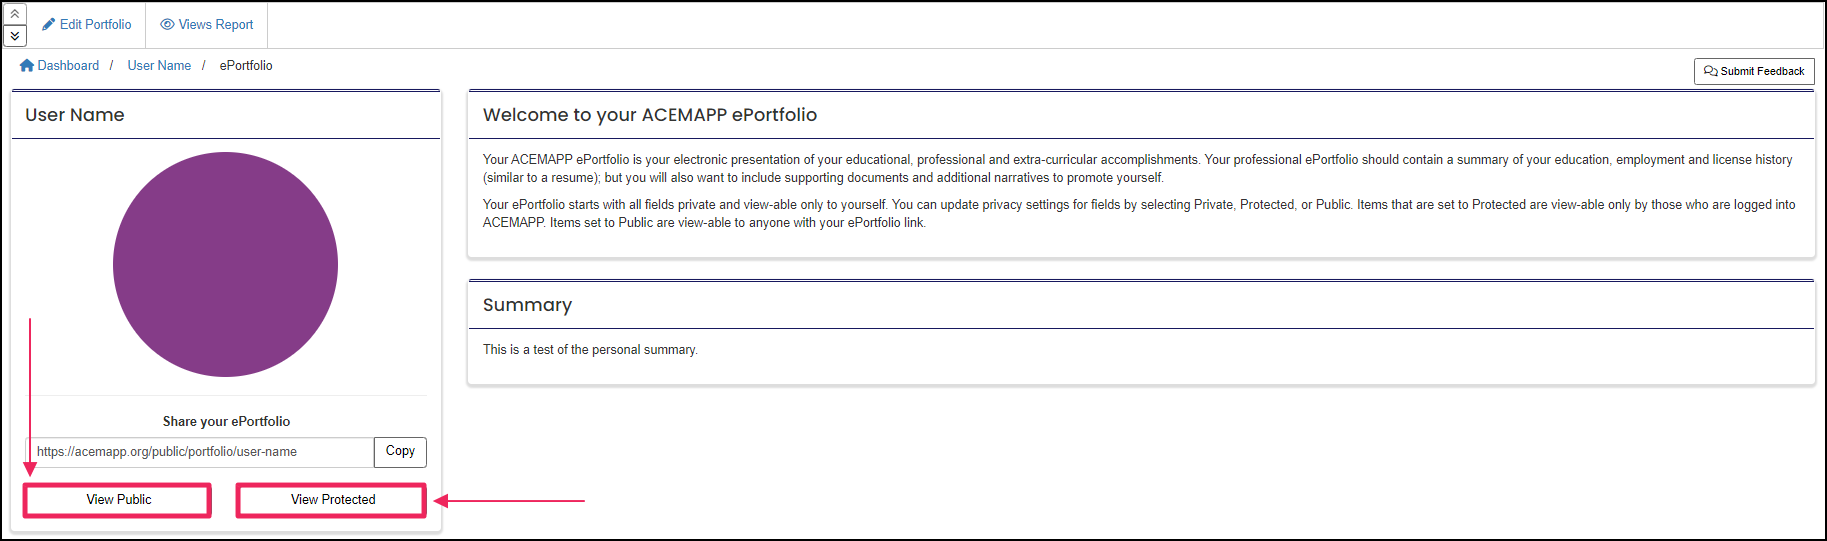 Image showing arrows pointing to the public and private features of the ePortfolio